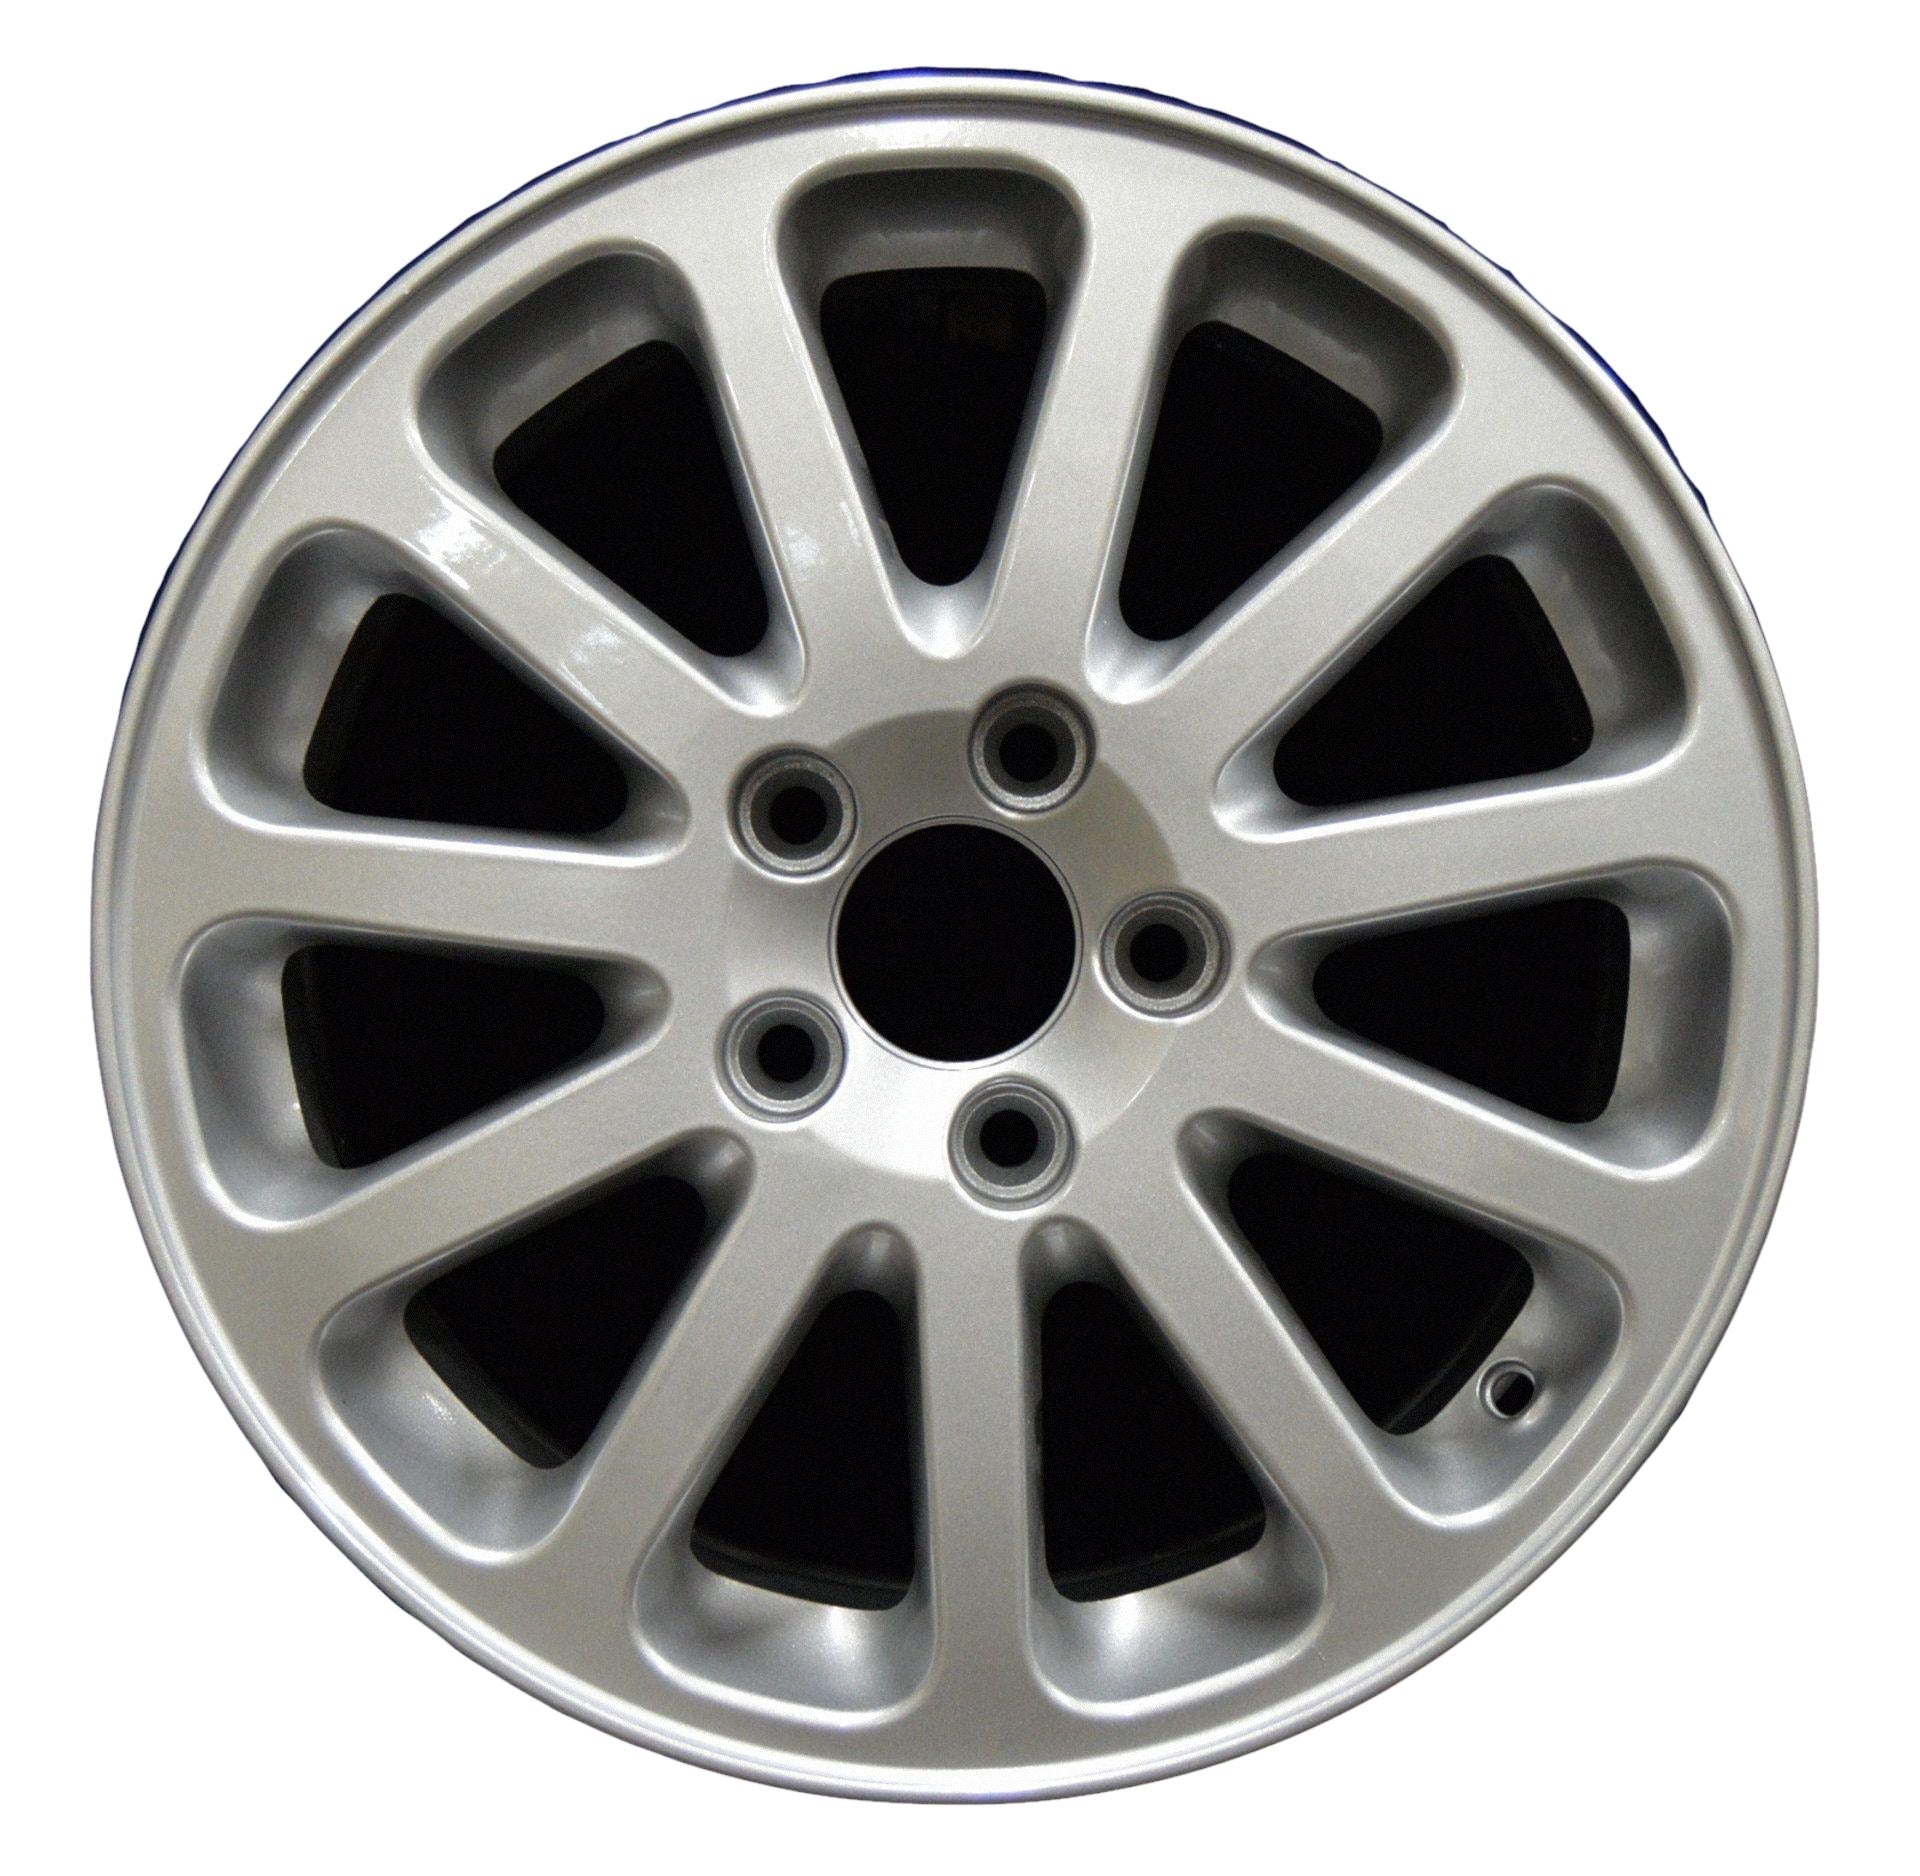 Volvo 60 Series  2007, 2008, 2009 Factory OEM Car Wheel Size 16x7 Alloy WAO.70210.PS10.FF